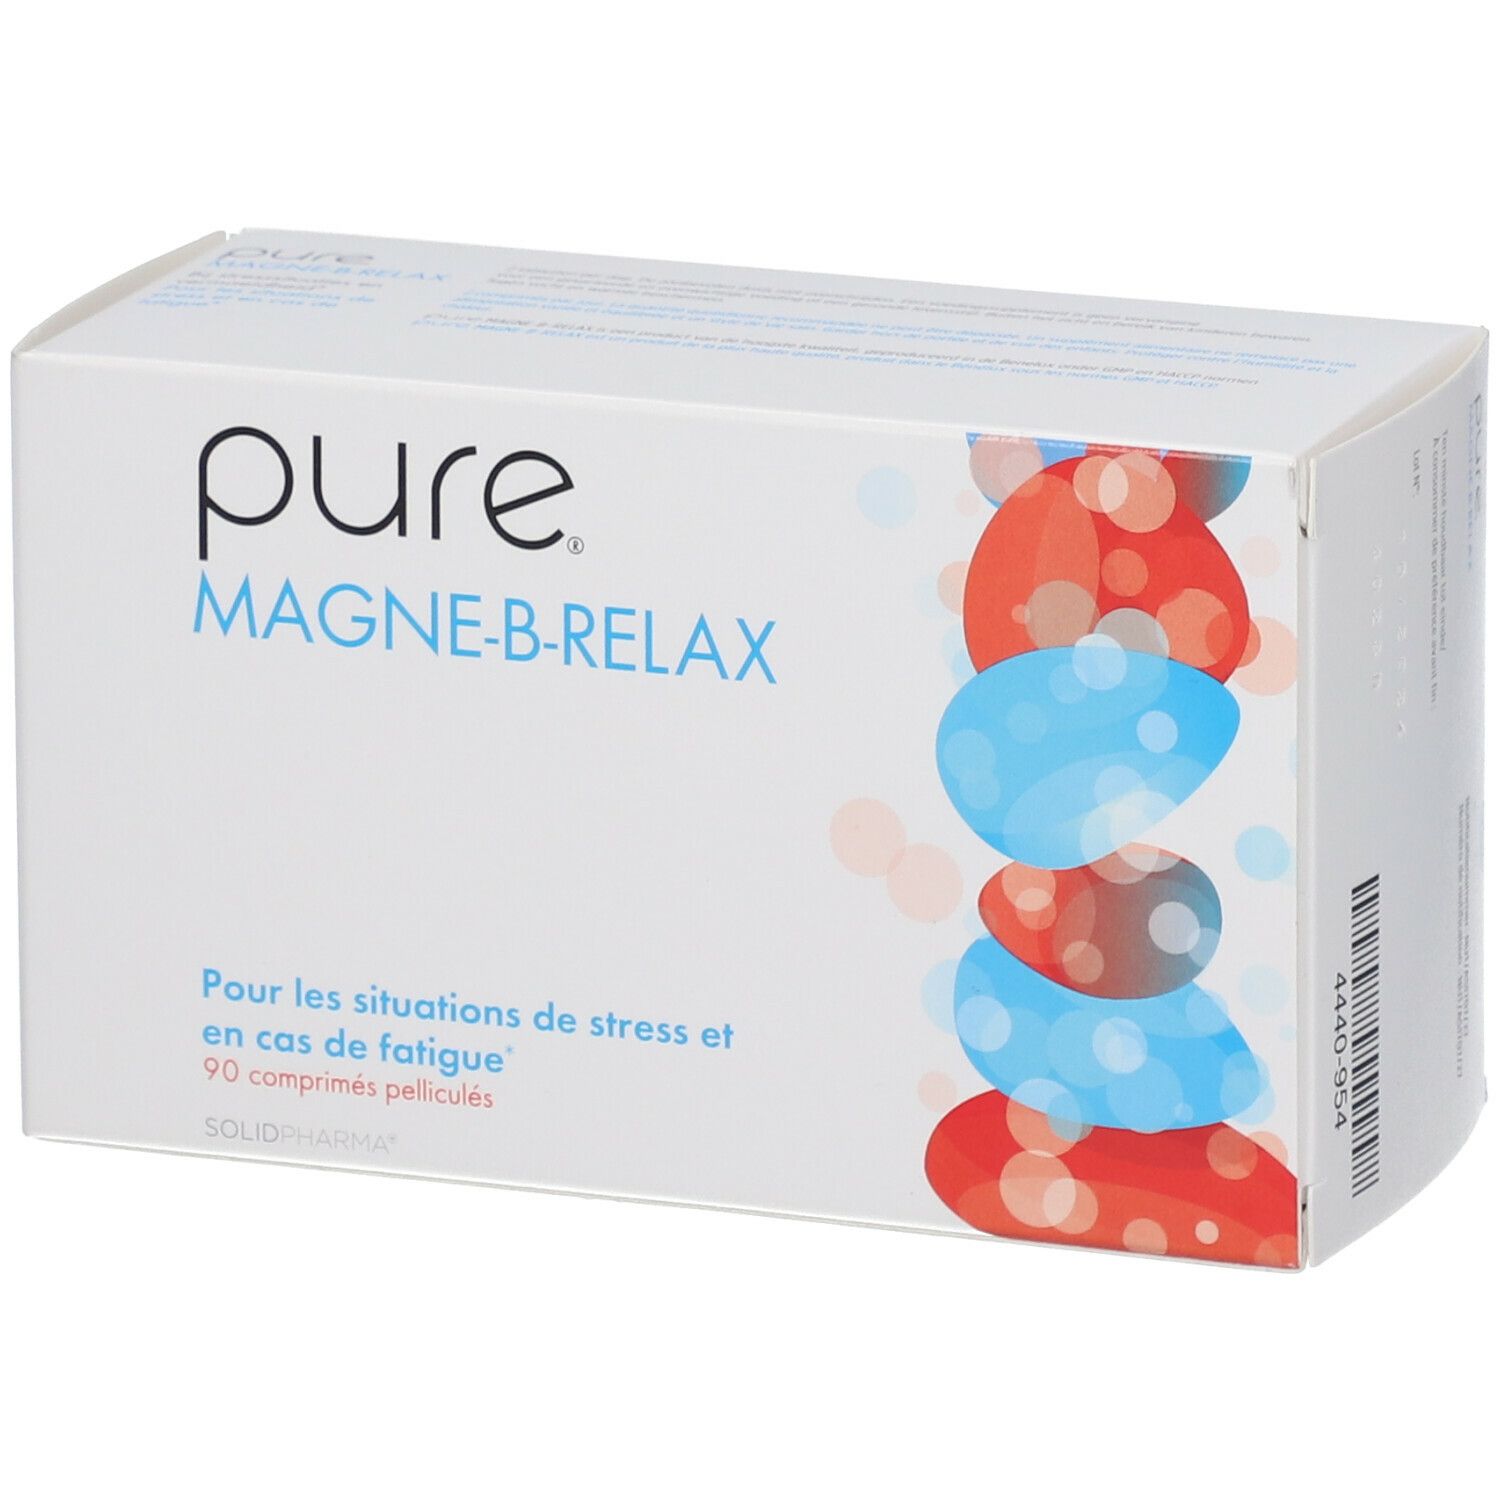 Pure® Magne-B-Relax